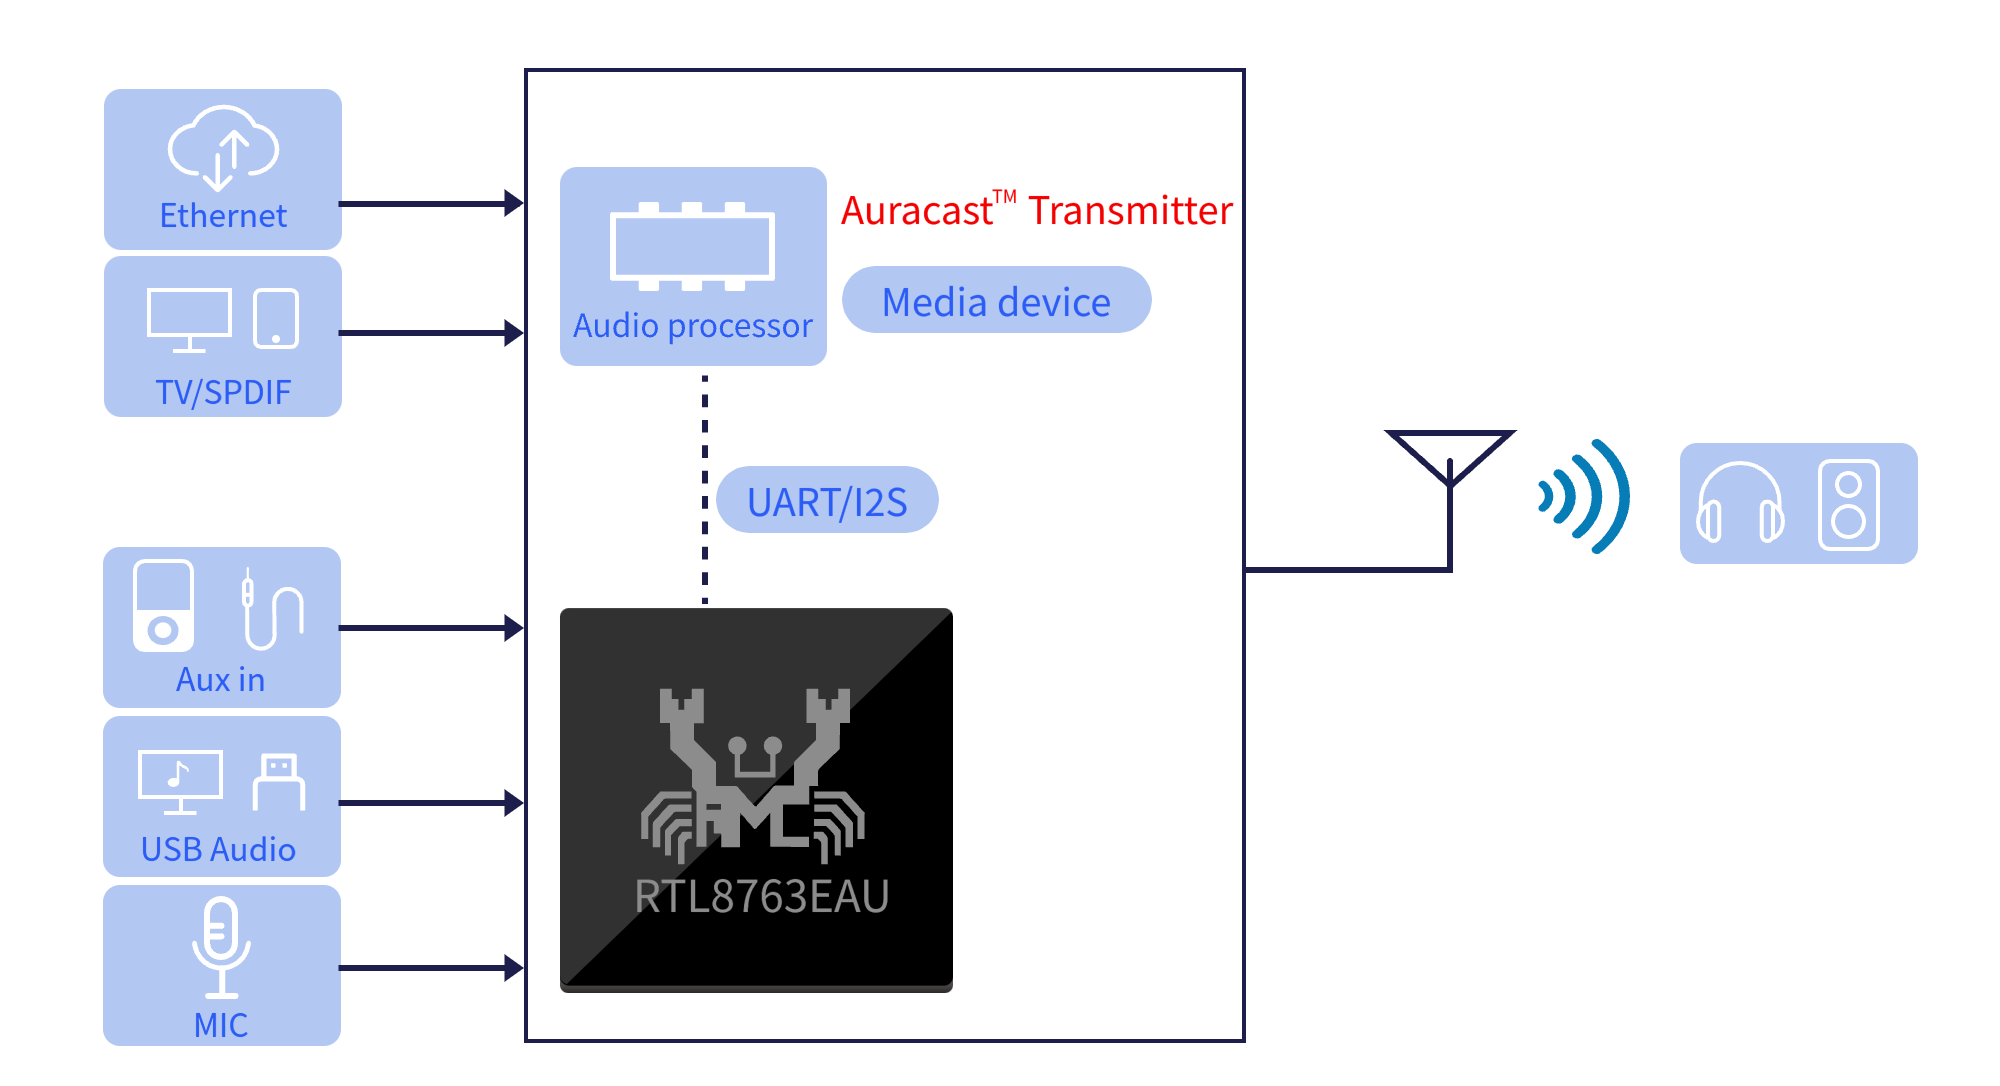 Media device with Auracast? Transmitter functionality